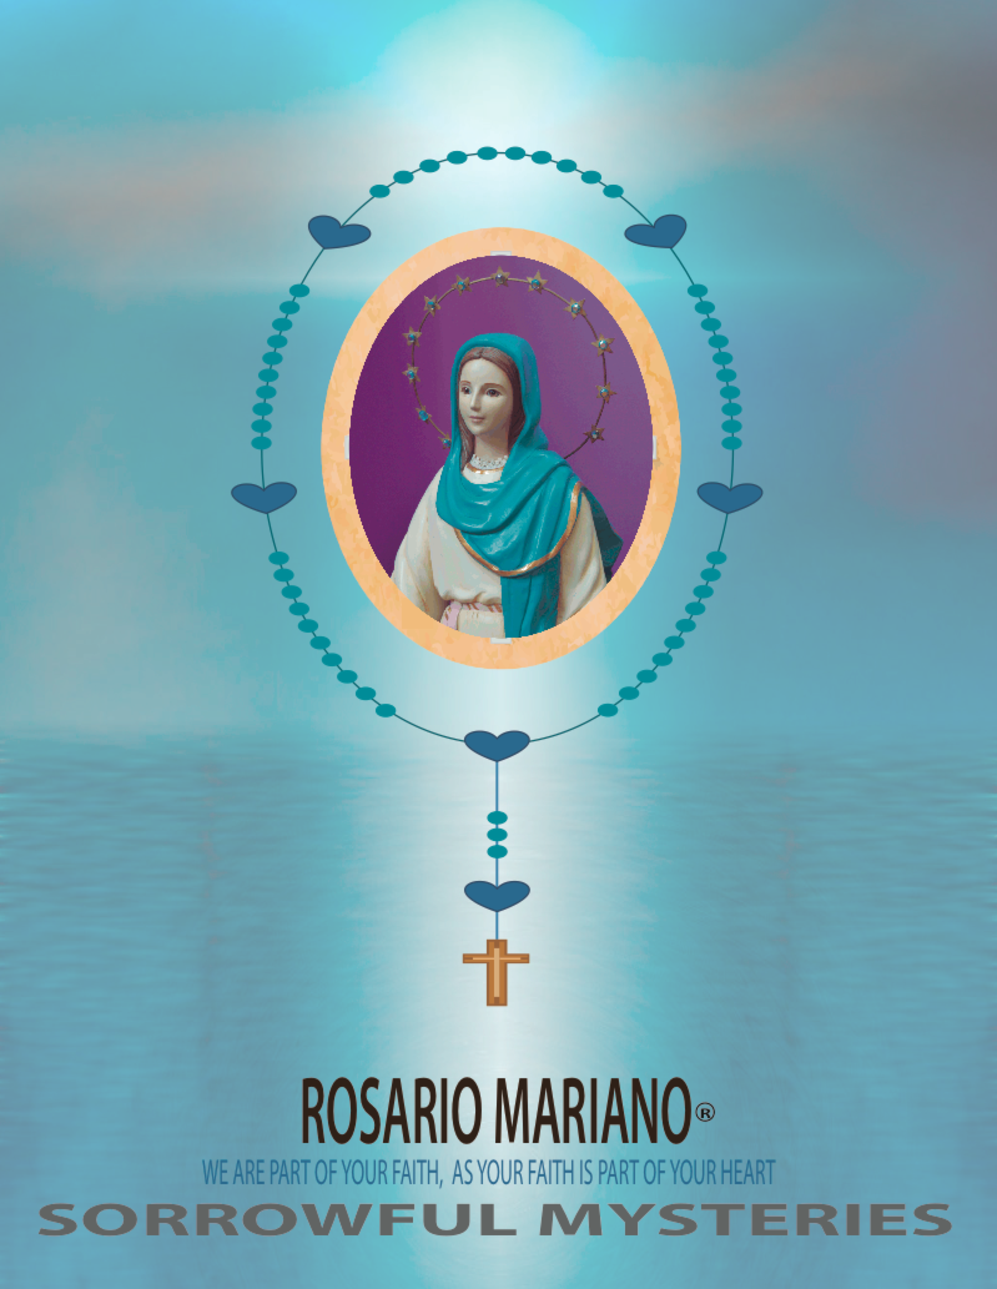 THE SWORD OF THE HOLY SPIRIT THE GOSPEL OF THE LORD, THE SPIRITUAL SWORD OF VIRGIN MARY: THE HOLY ROSARY; WELDED HERE BY THE HEARTS PRAY OF ROSARIO MARIANO SORROWFUL MYSTERIES FRONT PAGE